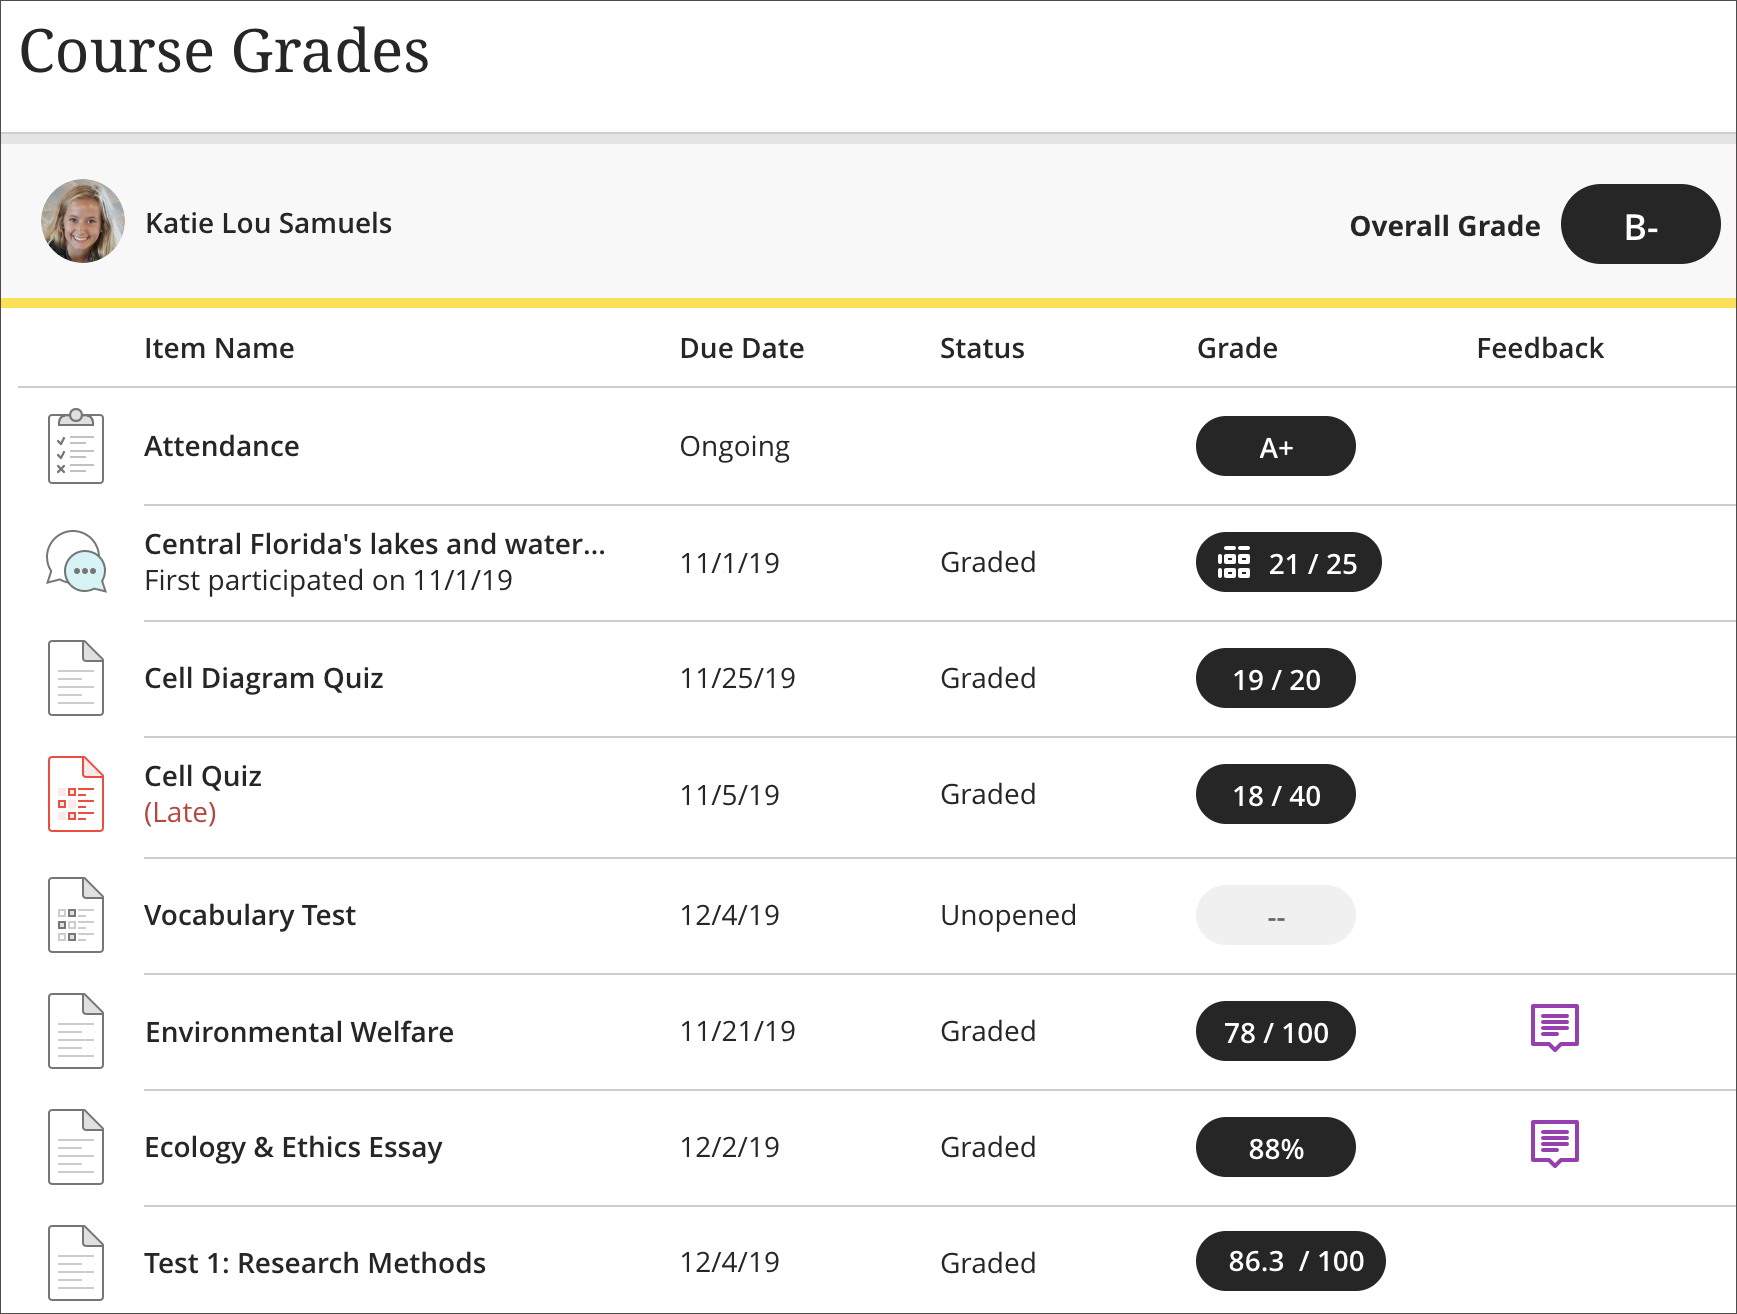 Course grades for an individual student